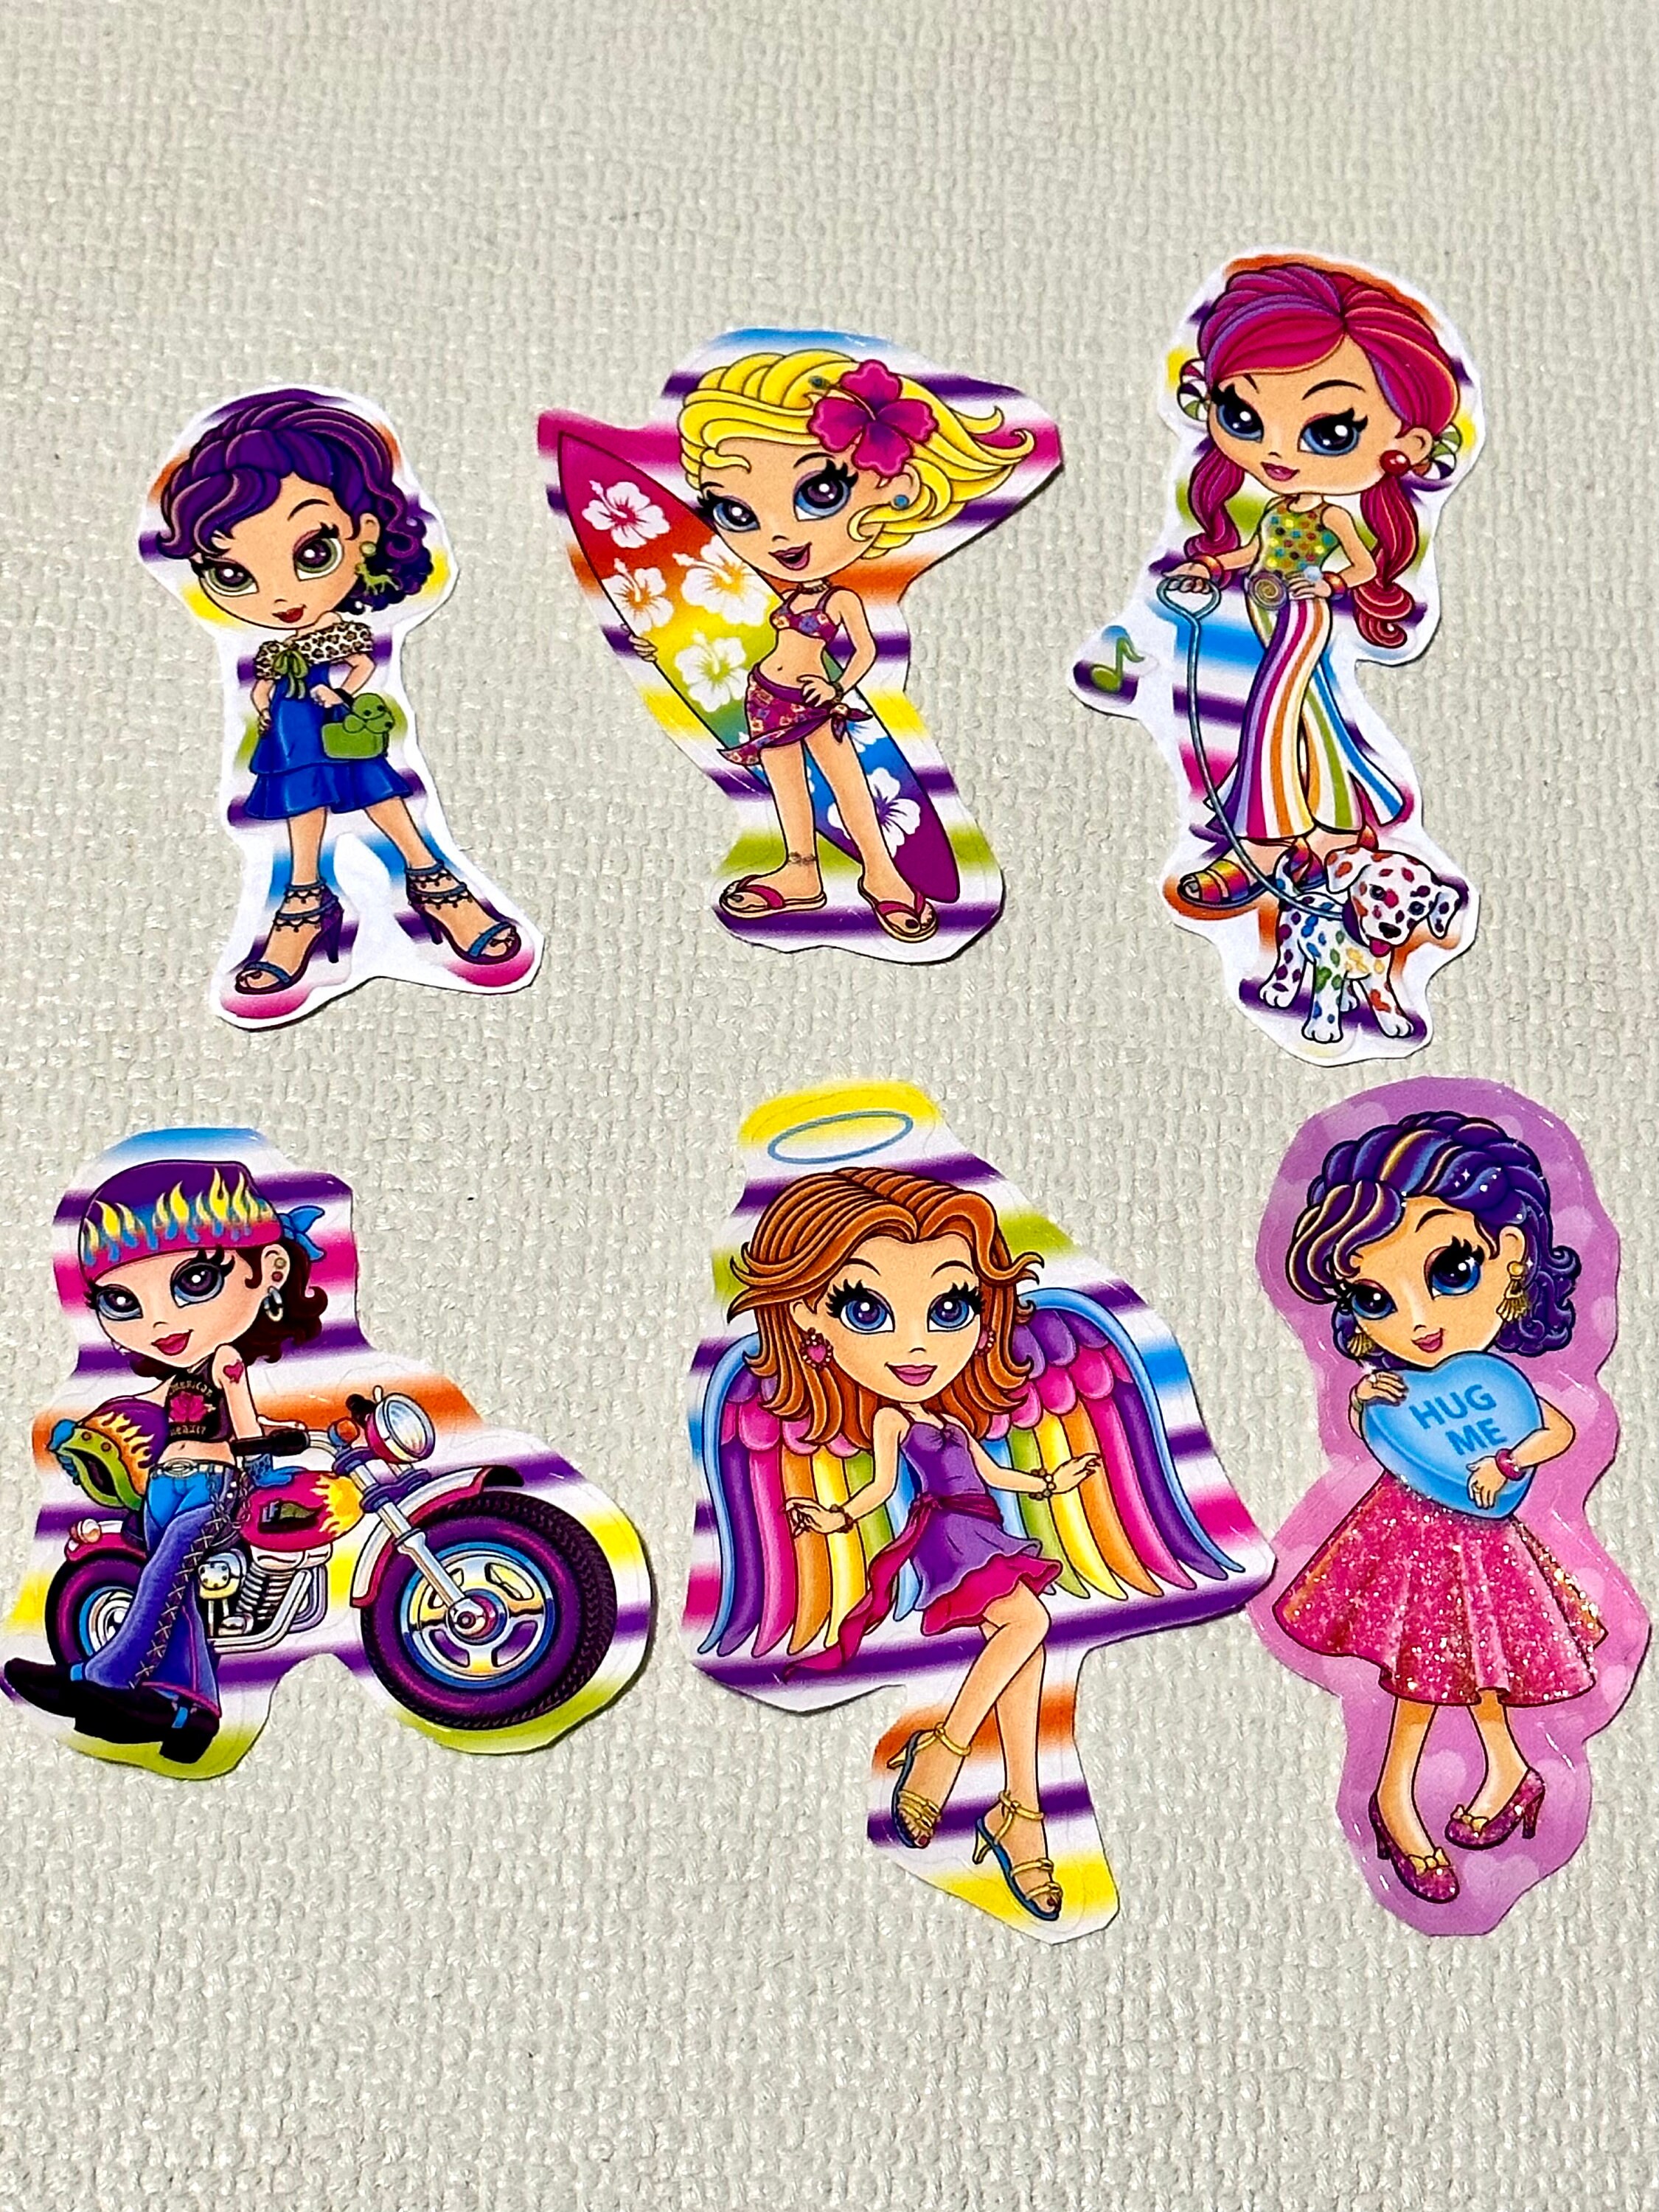 16 X Vintage Lisa Frank Party Decorations 1.5 to 4 Cutouts